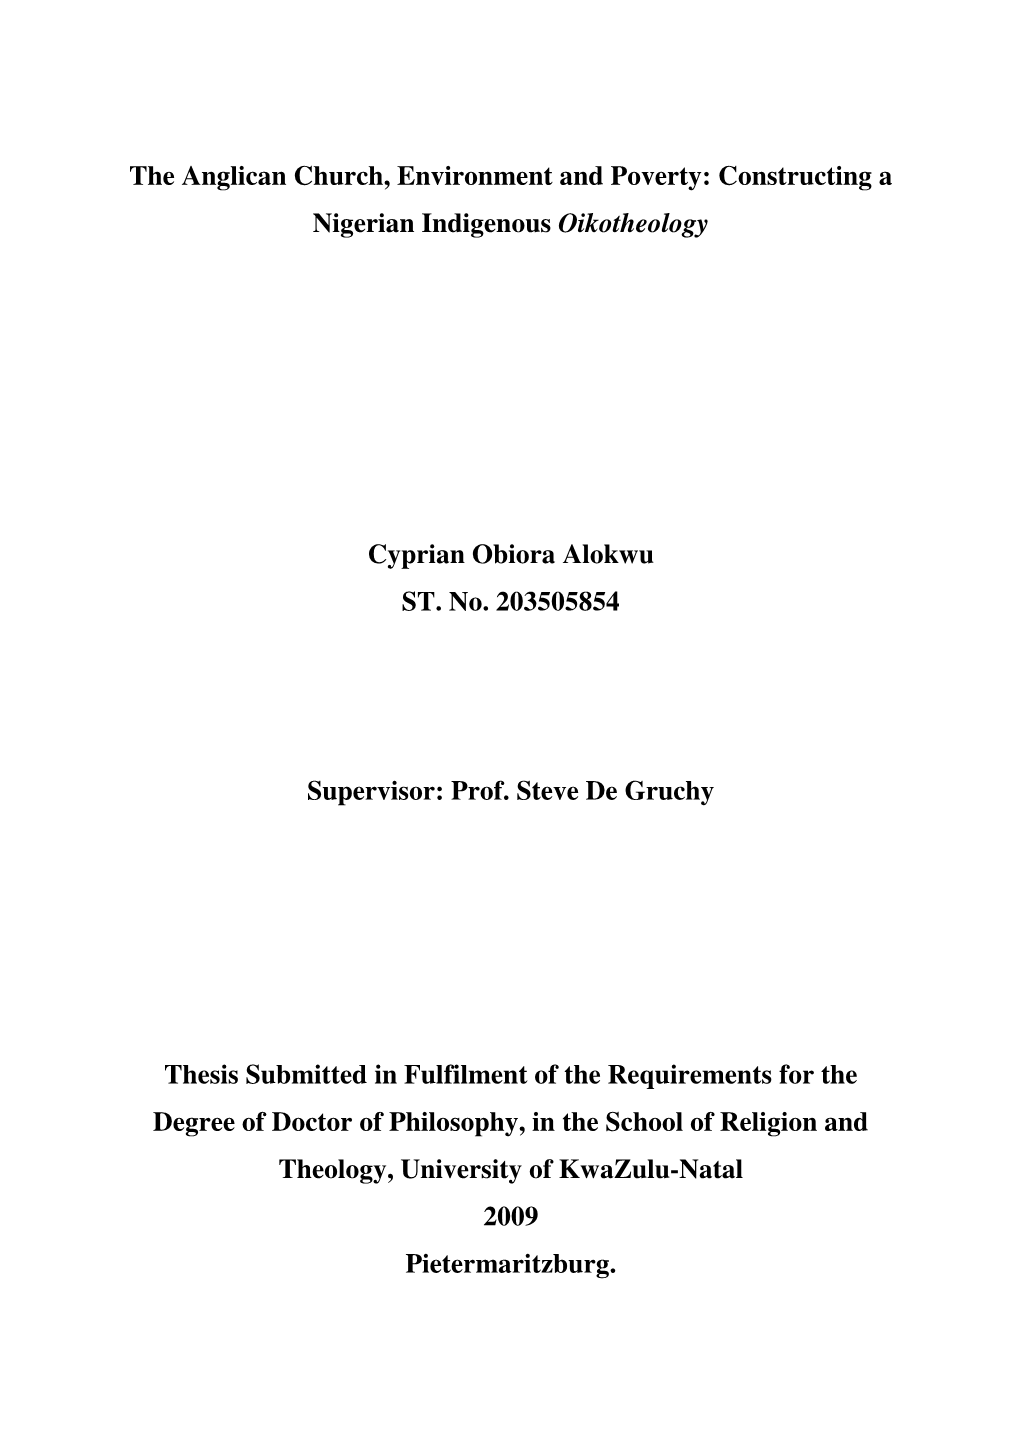 The Anglican Church, Environment and Poverty: Constructing a Nigerian Indigenous Oikotheology